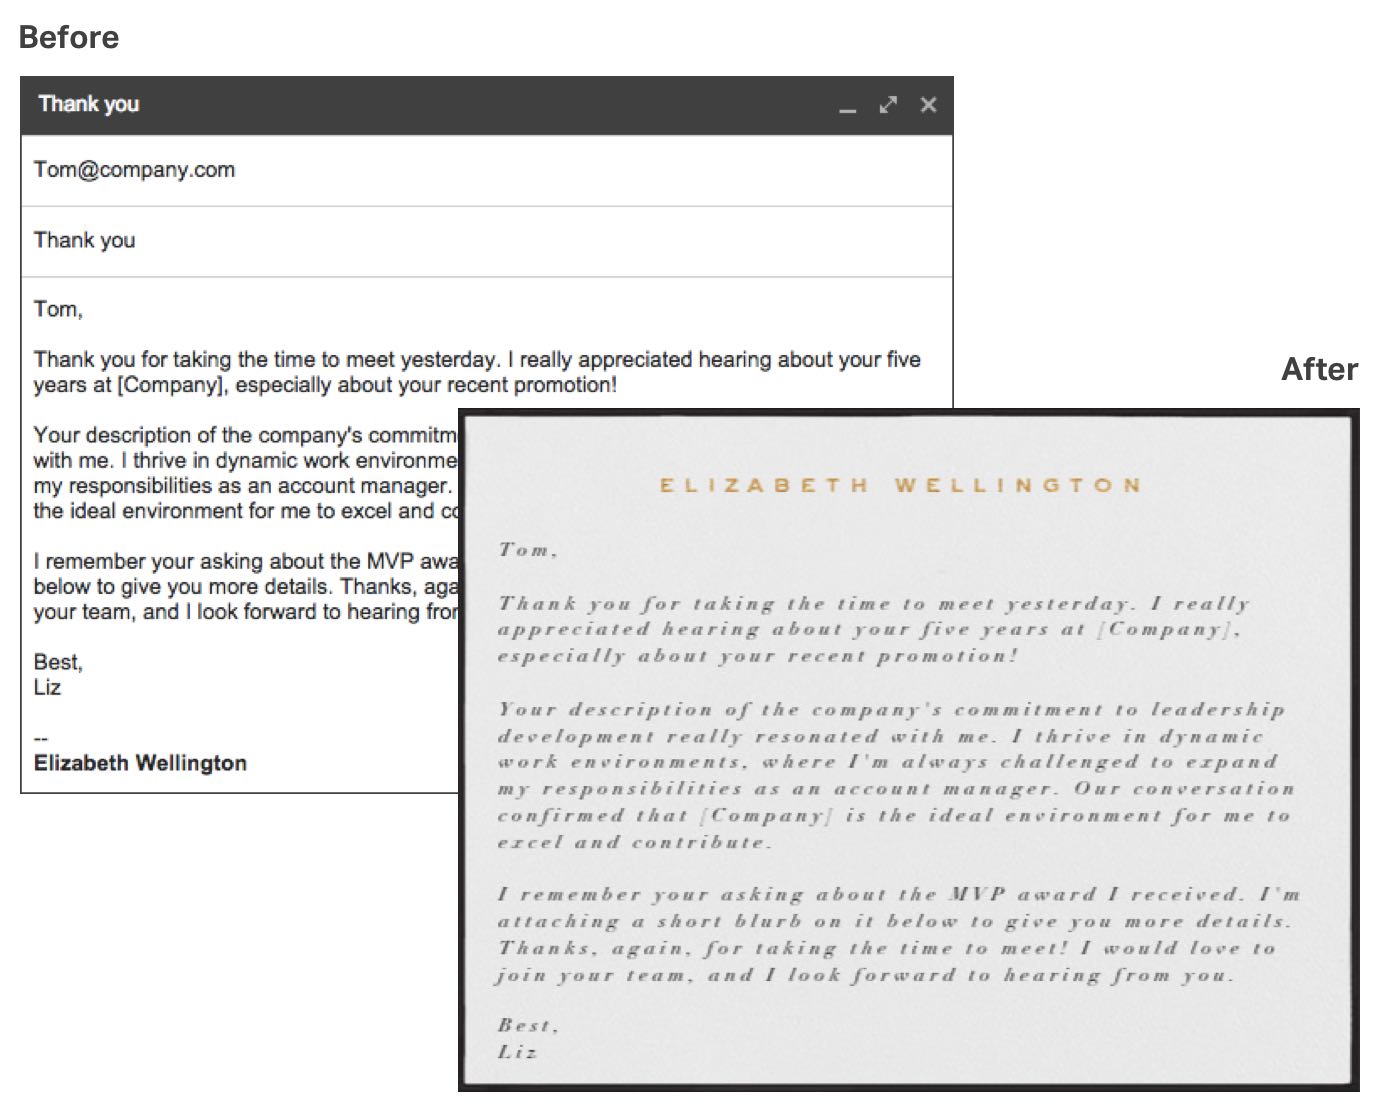 How to Write a Business Email With Attachments